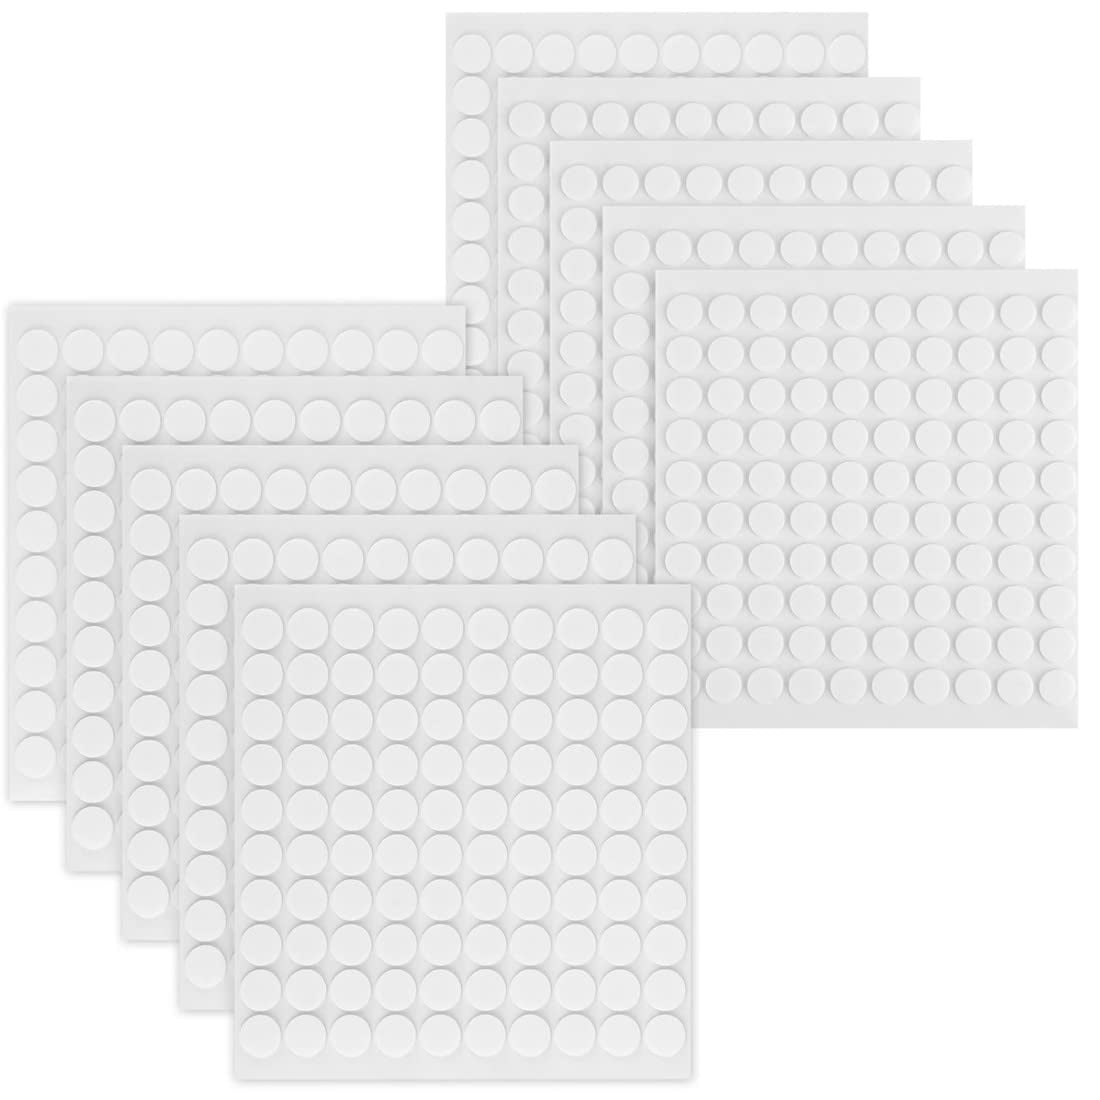  Baluue 5 Sheets Foam Double Sided Tape Dual Adhesive Foam Dots  Craft Supplies Adhesive Craft Foam Card Making Supplies Foam Squares for  Crafts Double Side Tape White 3D Mini Foam Board 